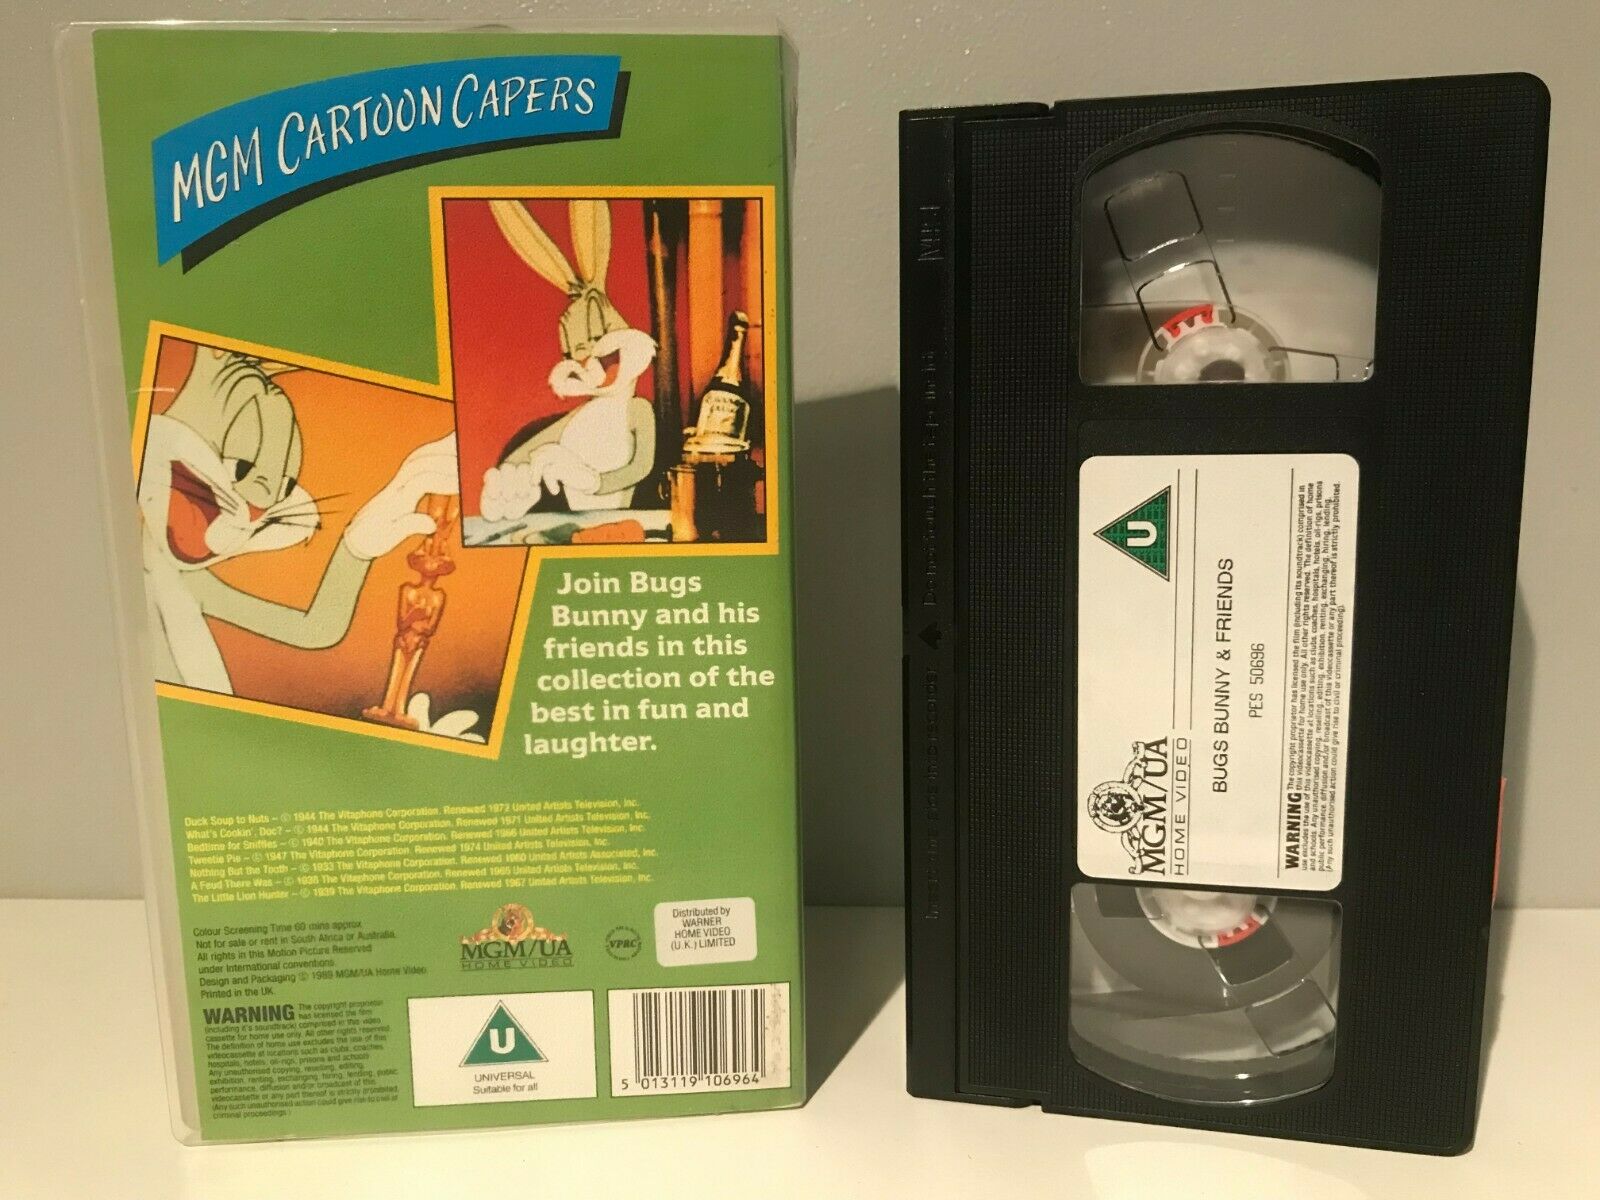 The Best Of Bugs Bunny And Friends [MGM Cartoon Capers] Children's - Pal VHS-